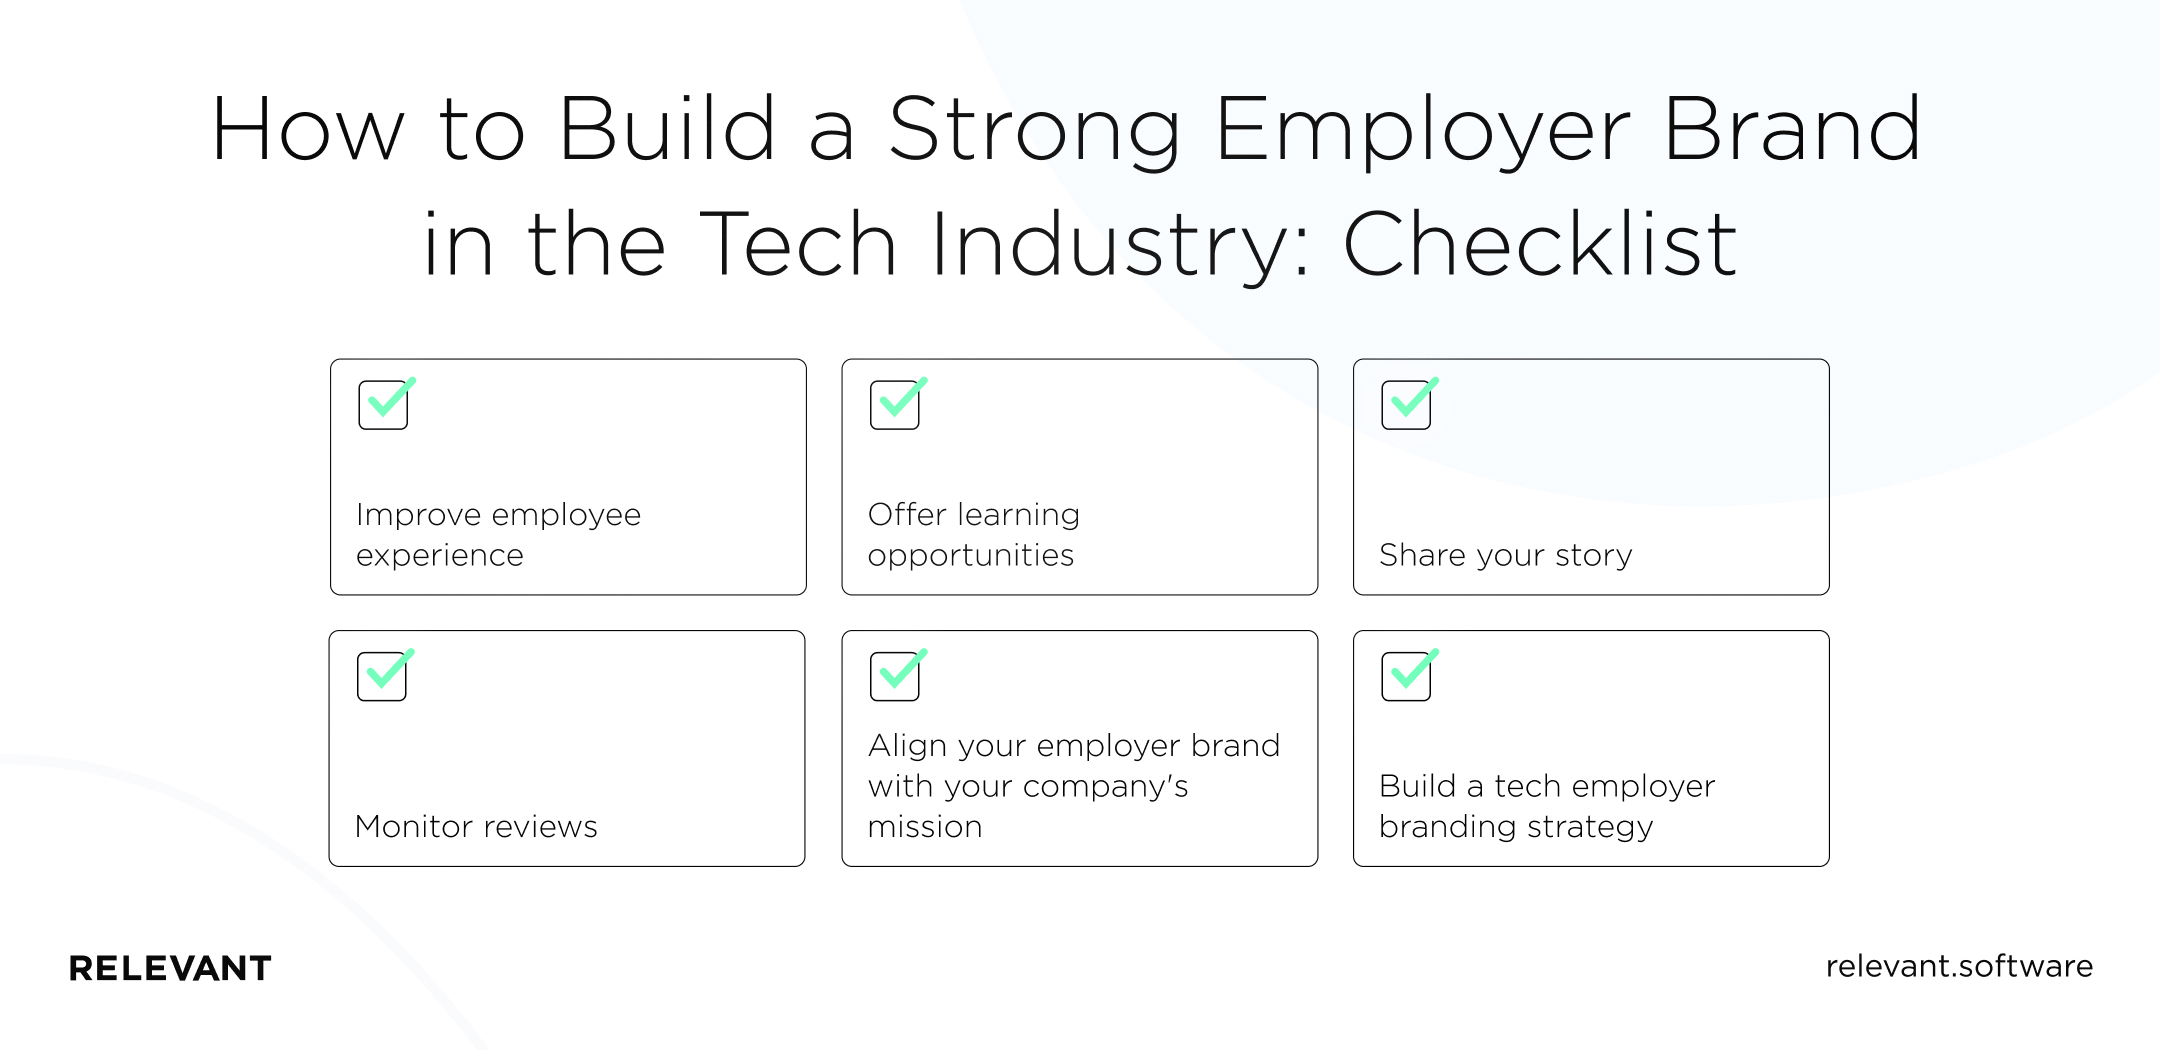 How to Build a Strong Employer Brand